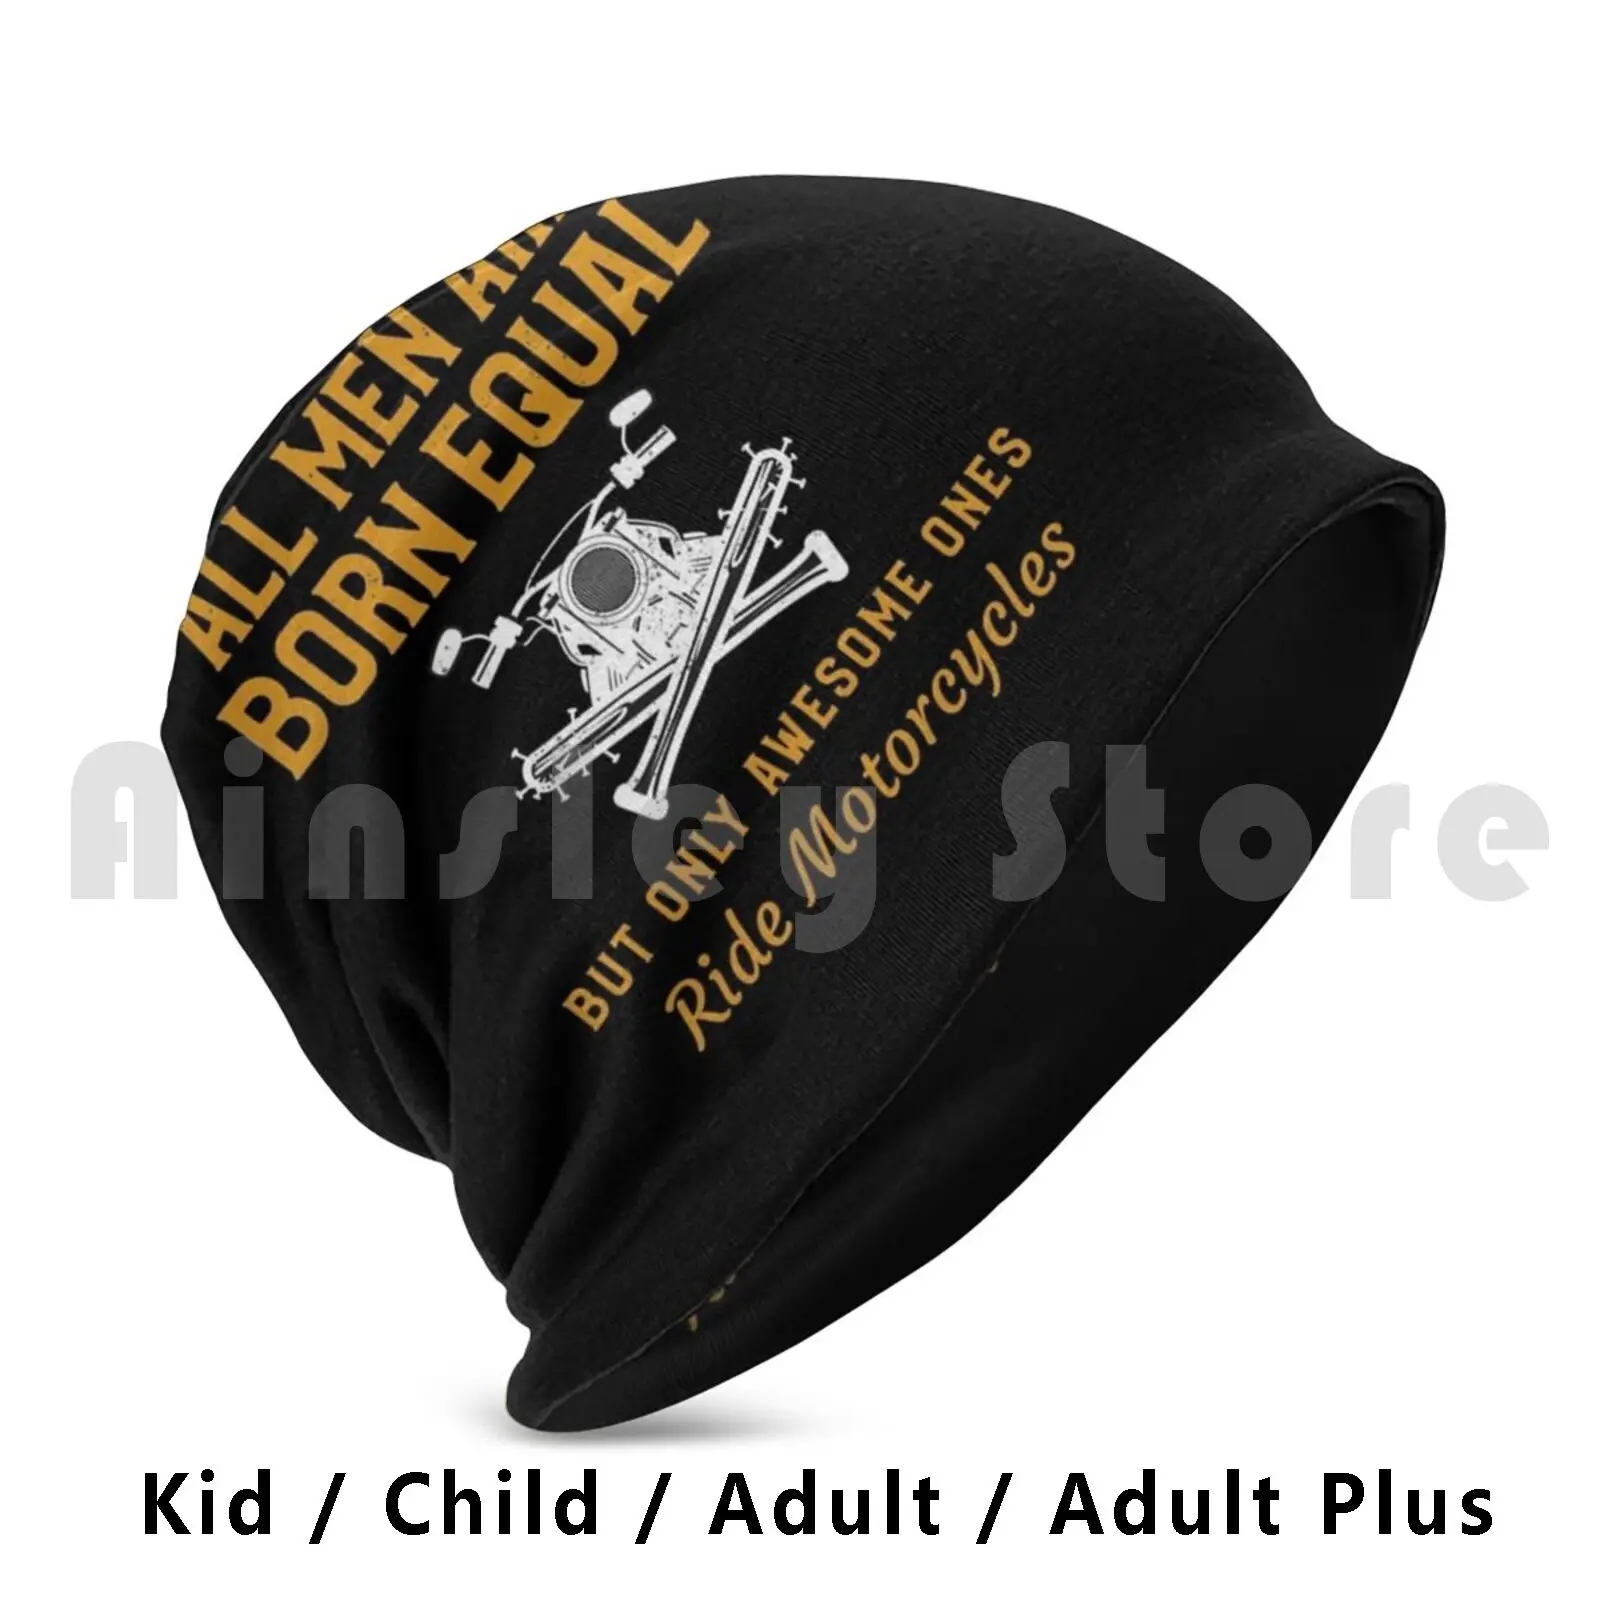 

All Men Are Born Equal. Only Awesome Ones Ride Motorcycles Funny Biker Design Beanie Hedging Cap DIY Print Cushion